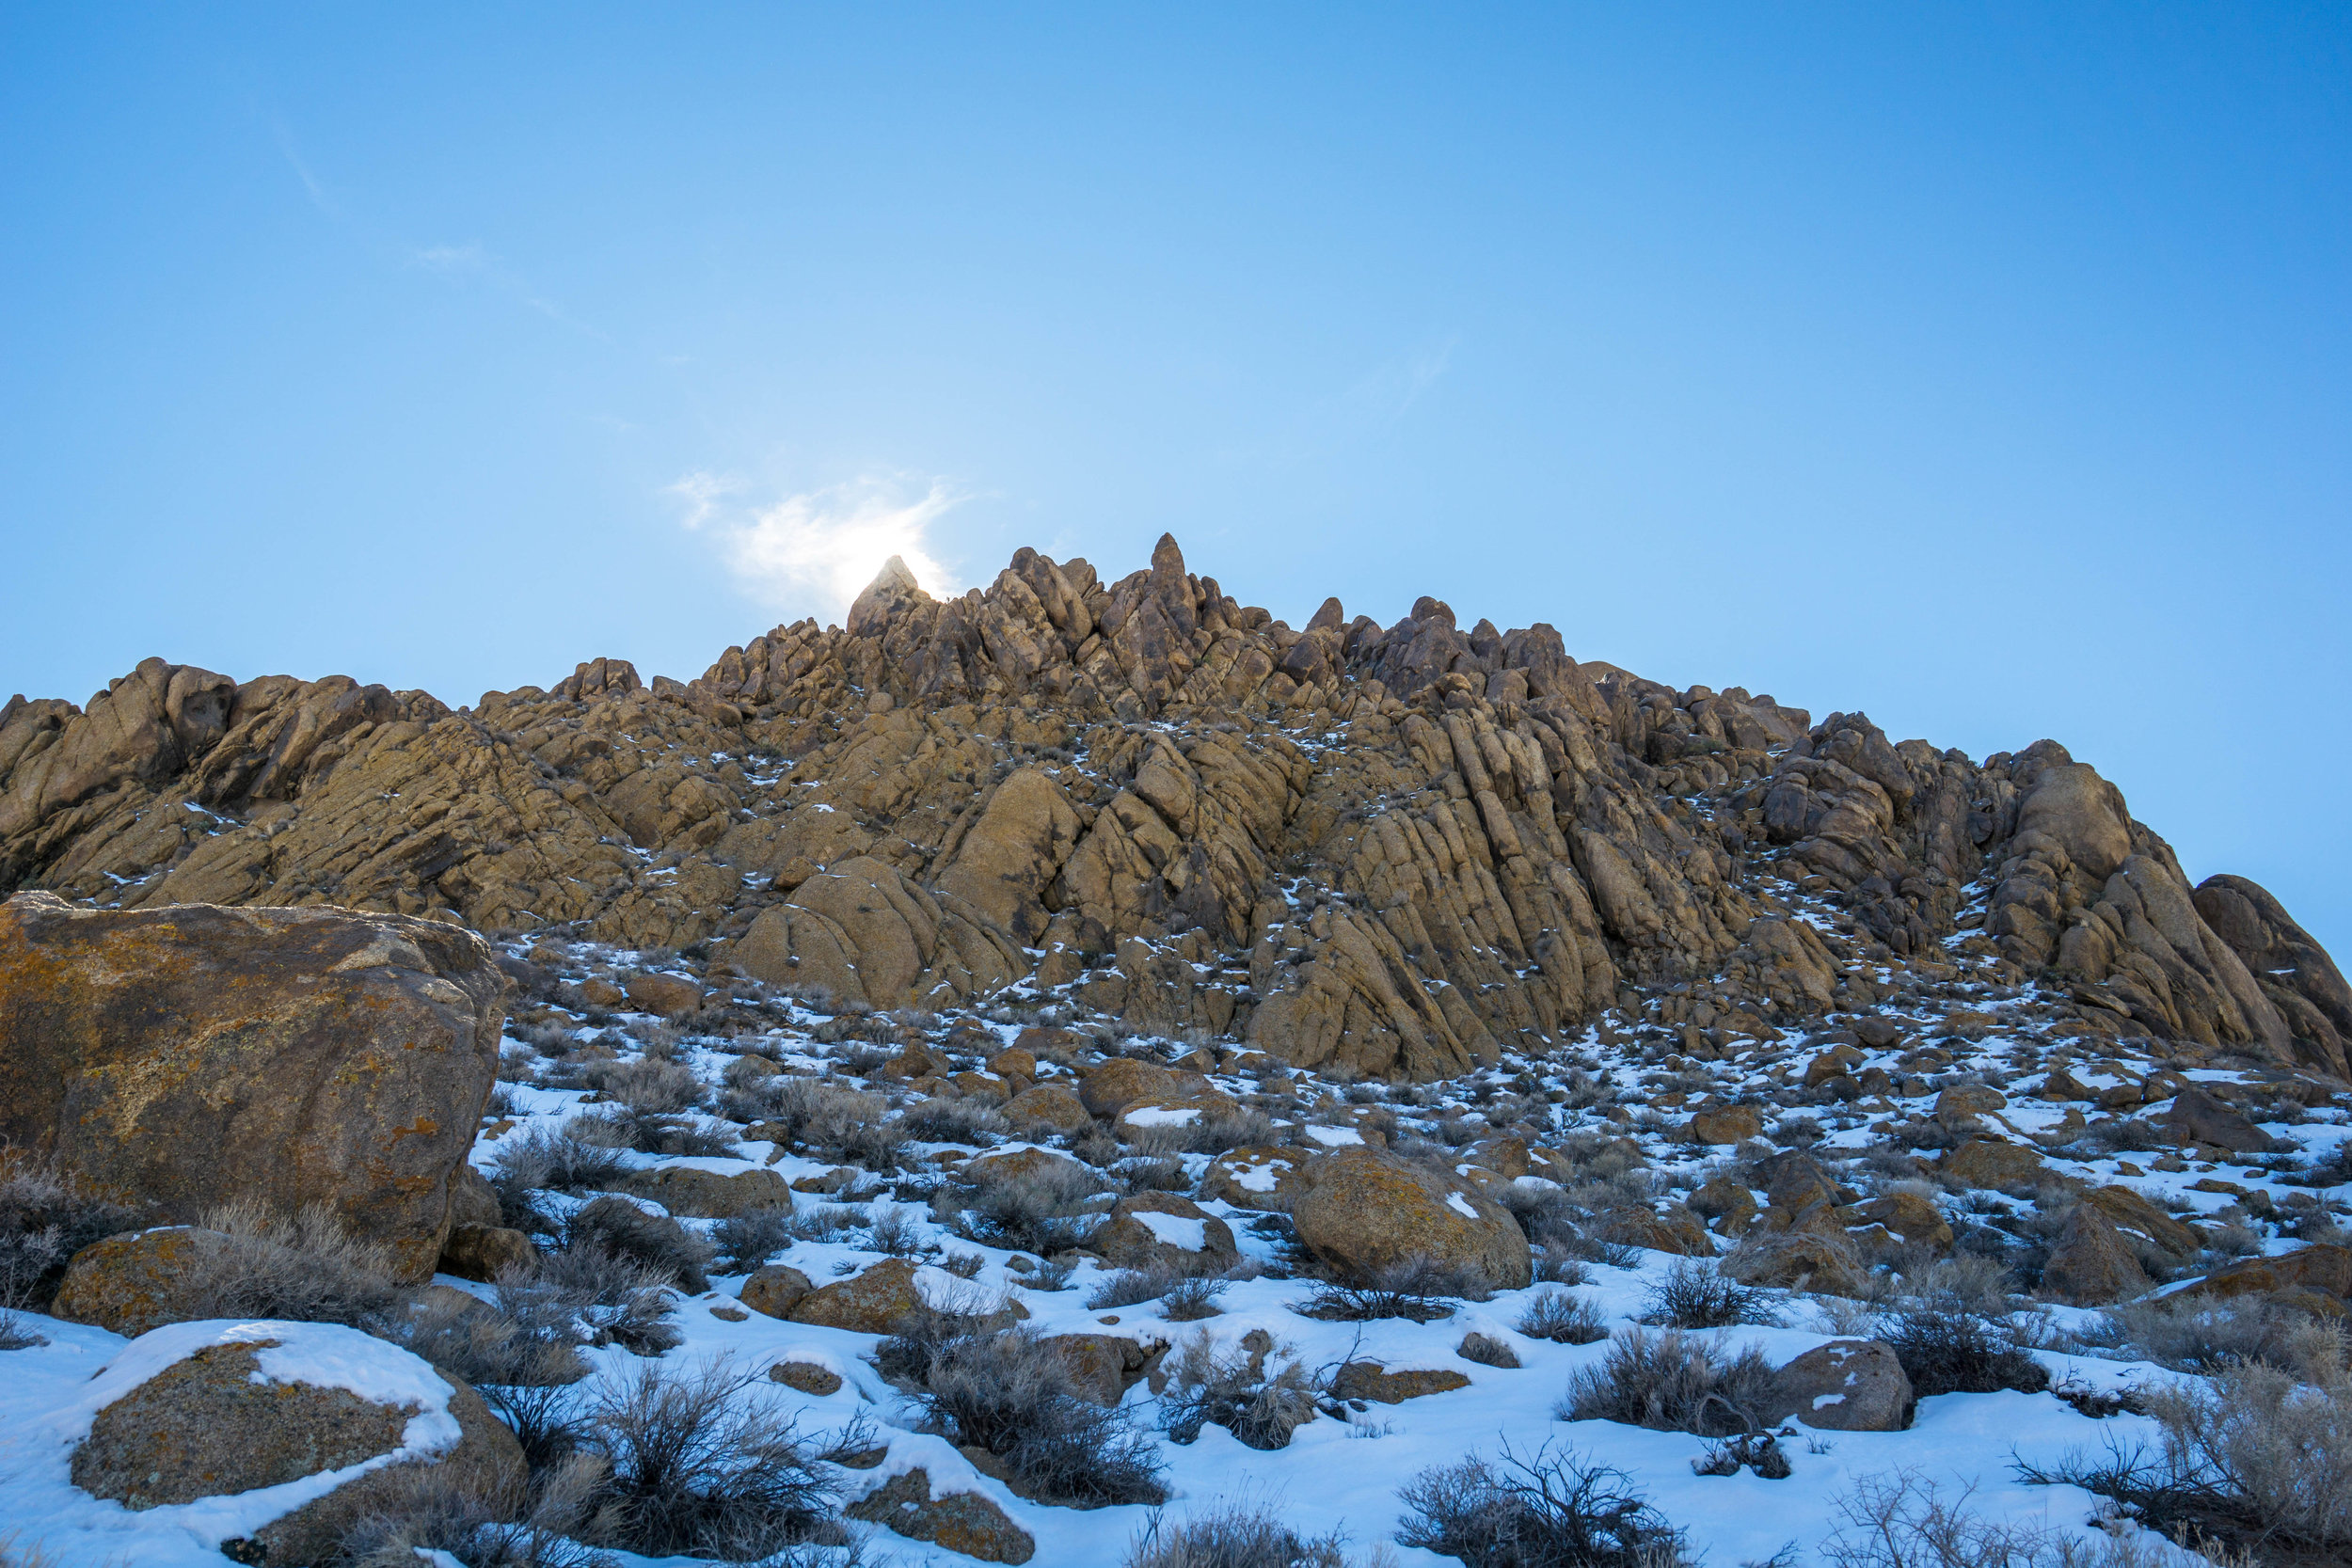 The rocky Alabama Hills are normally free of snow, but a late winter storm created a beautifully rare contrast.